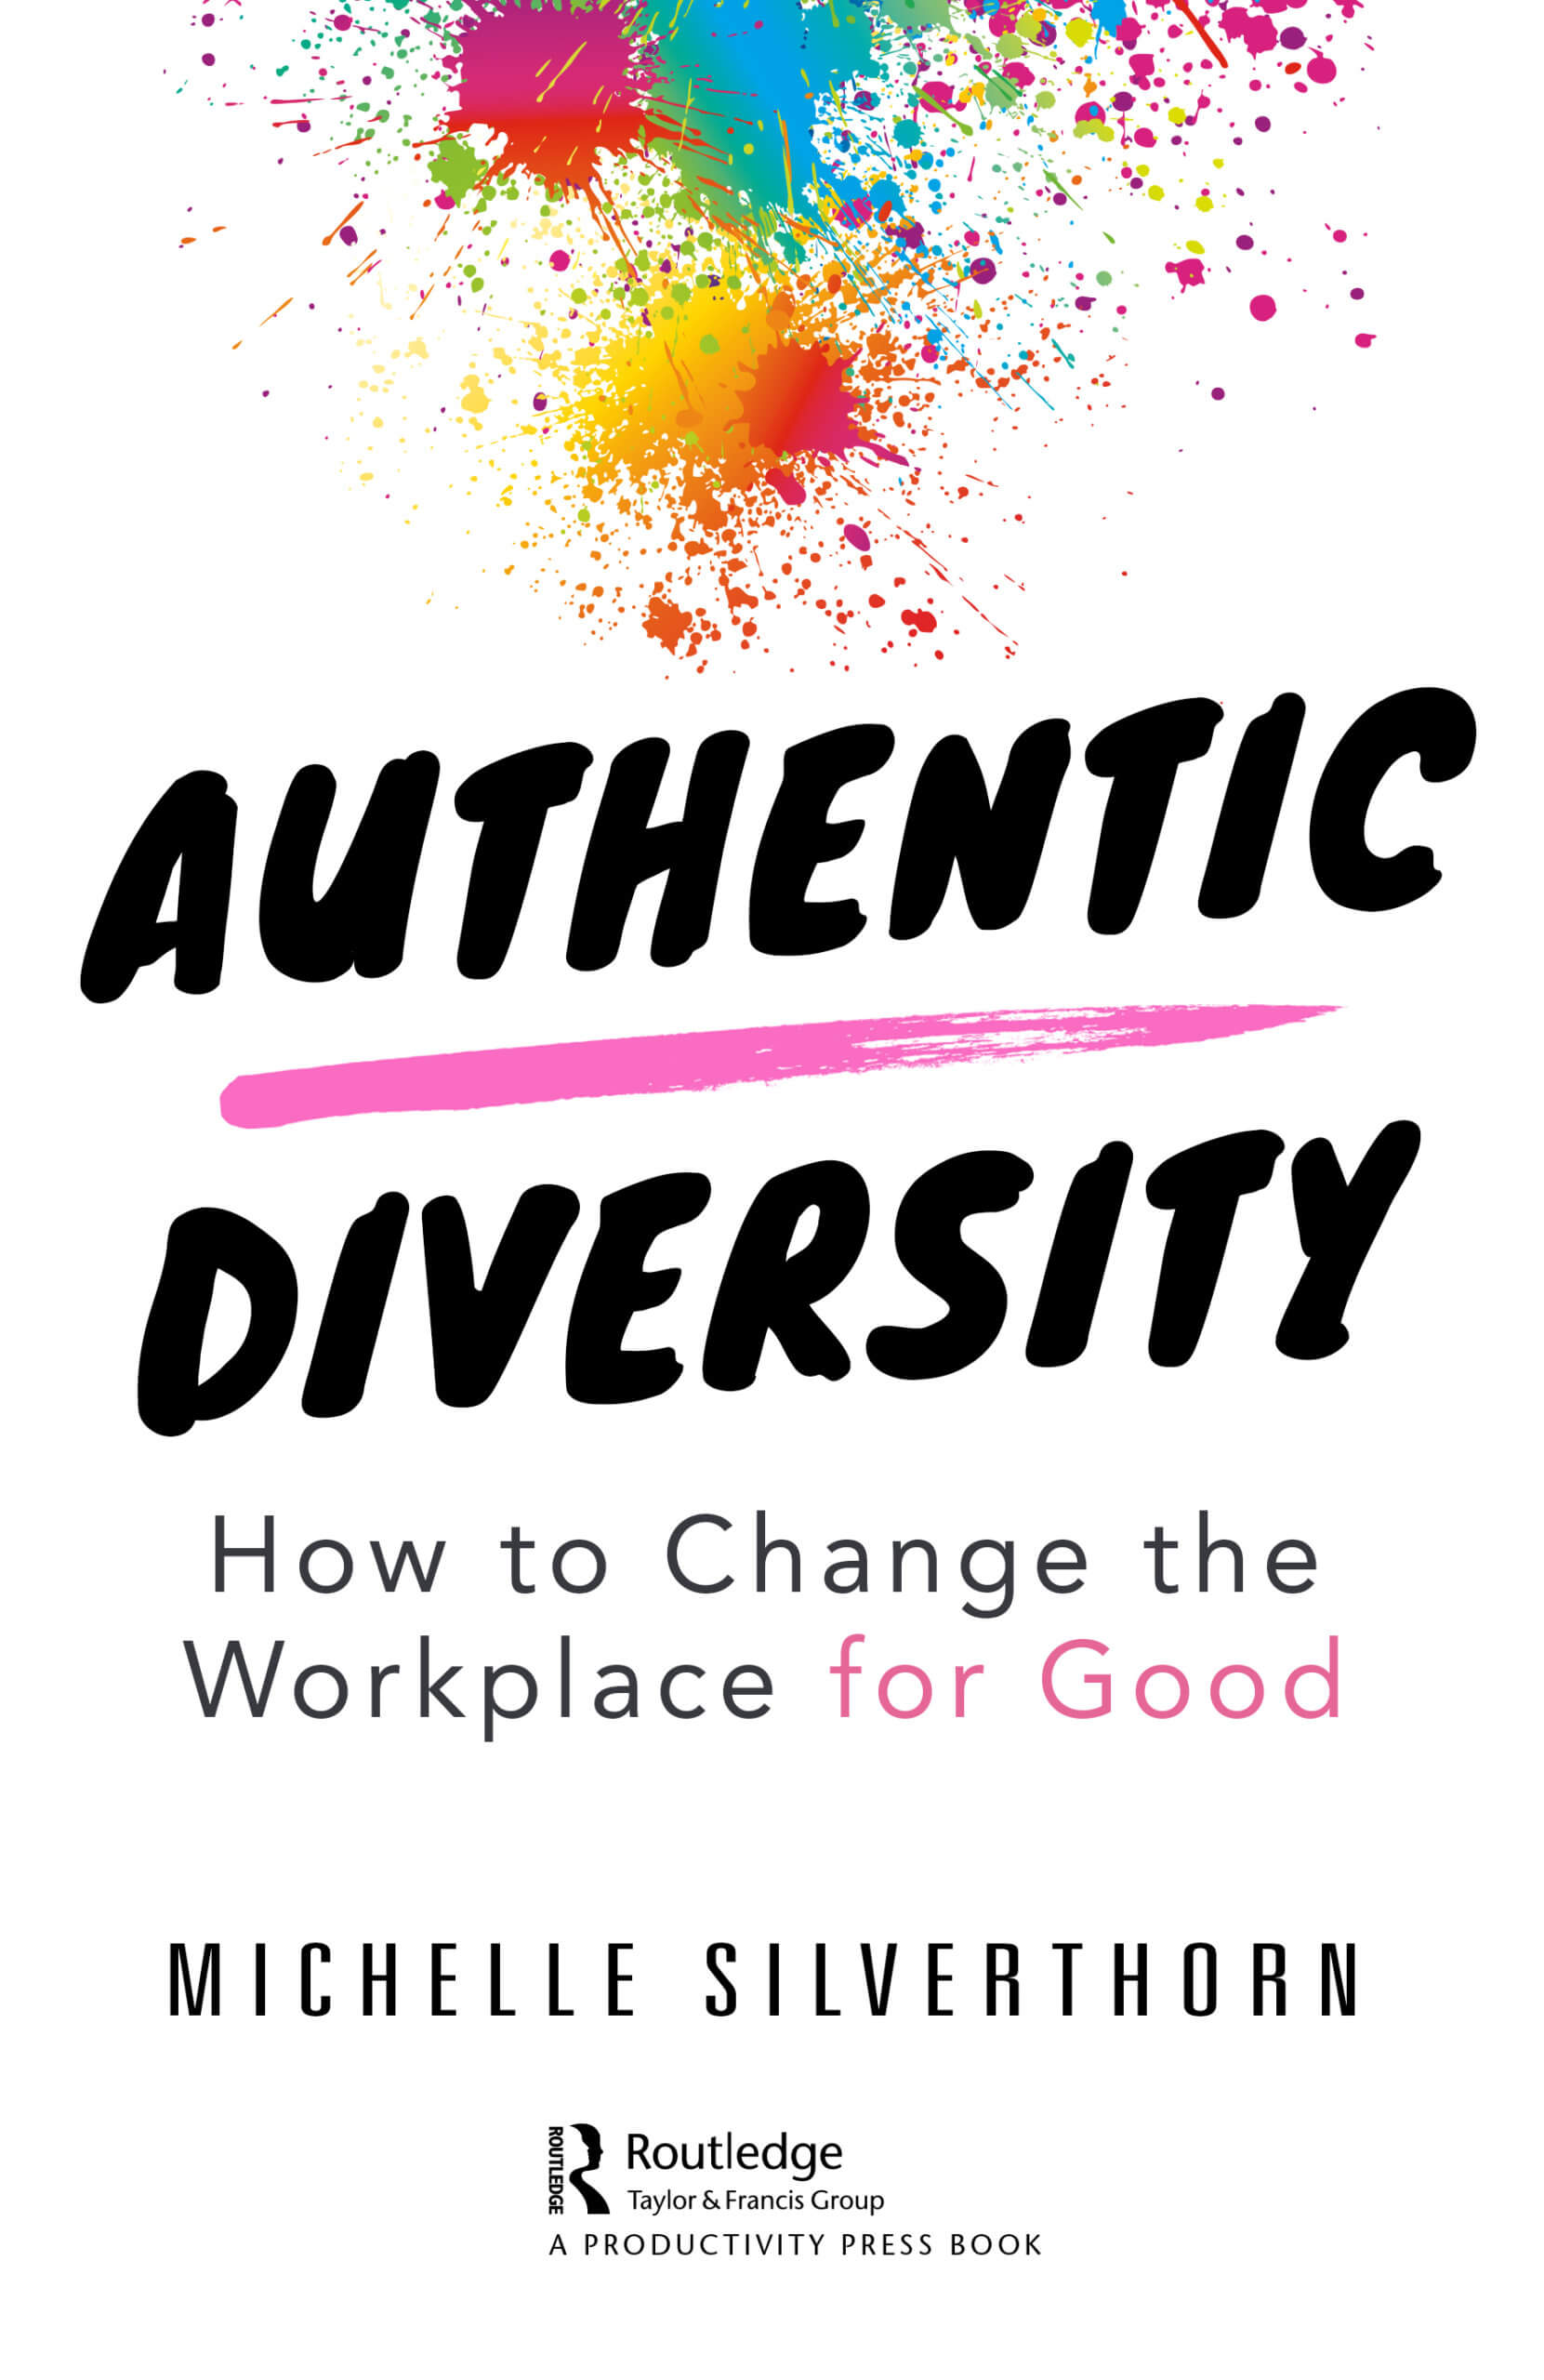 https://www.thebookfest.com/wp-content/uploads/2020/09/Authentic-Diversity-book-cover-scaled.jpg